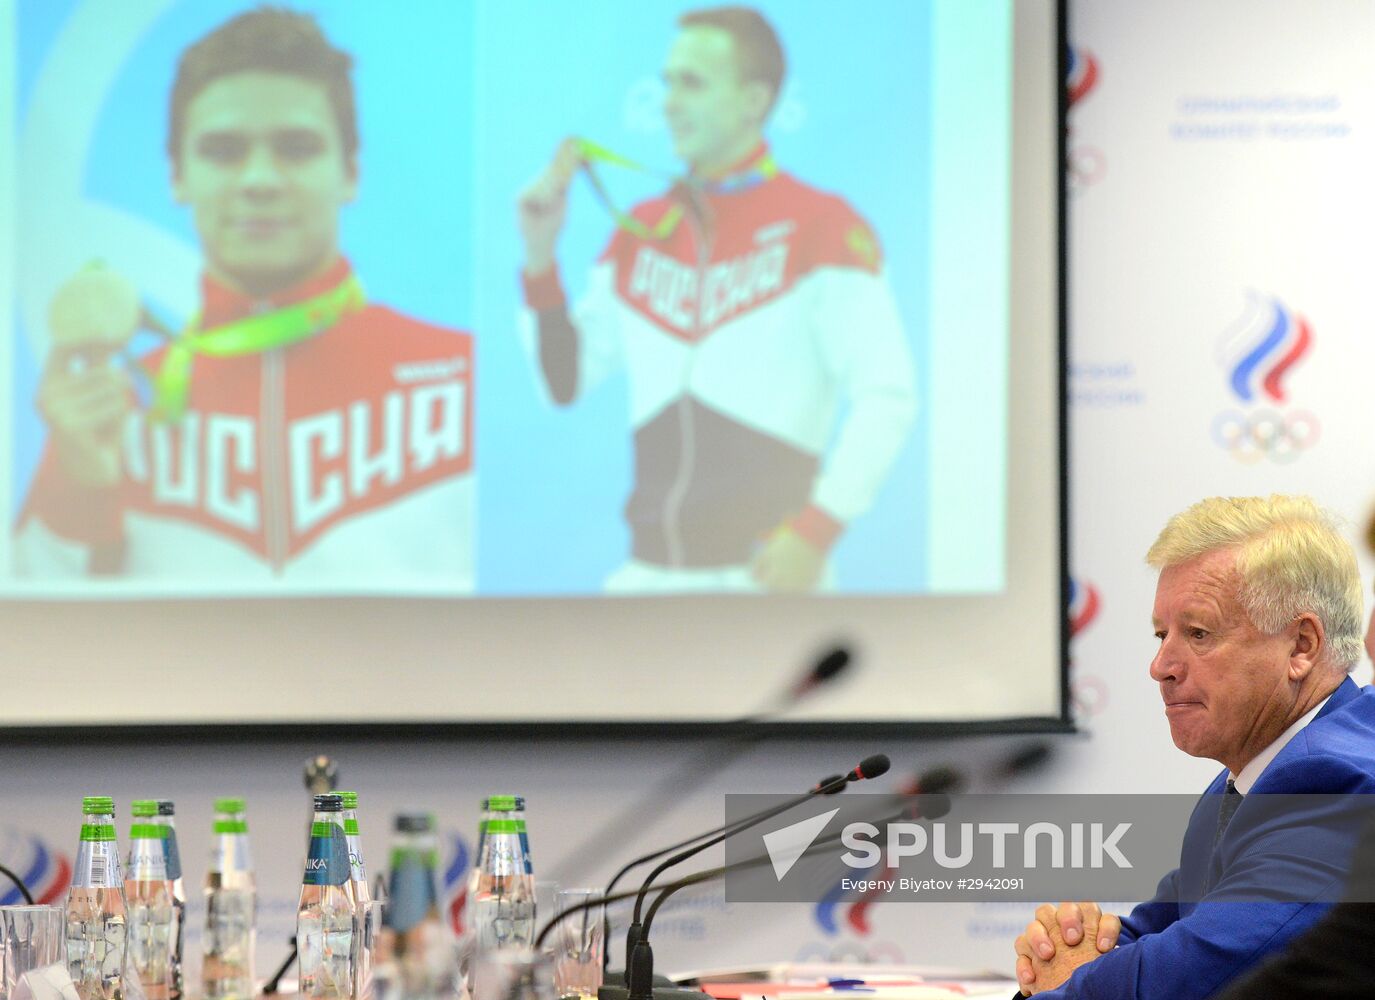 Meeting of Russian Olympic Committee's executive board